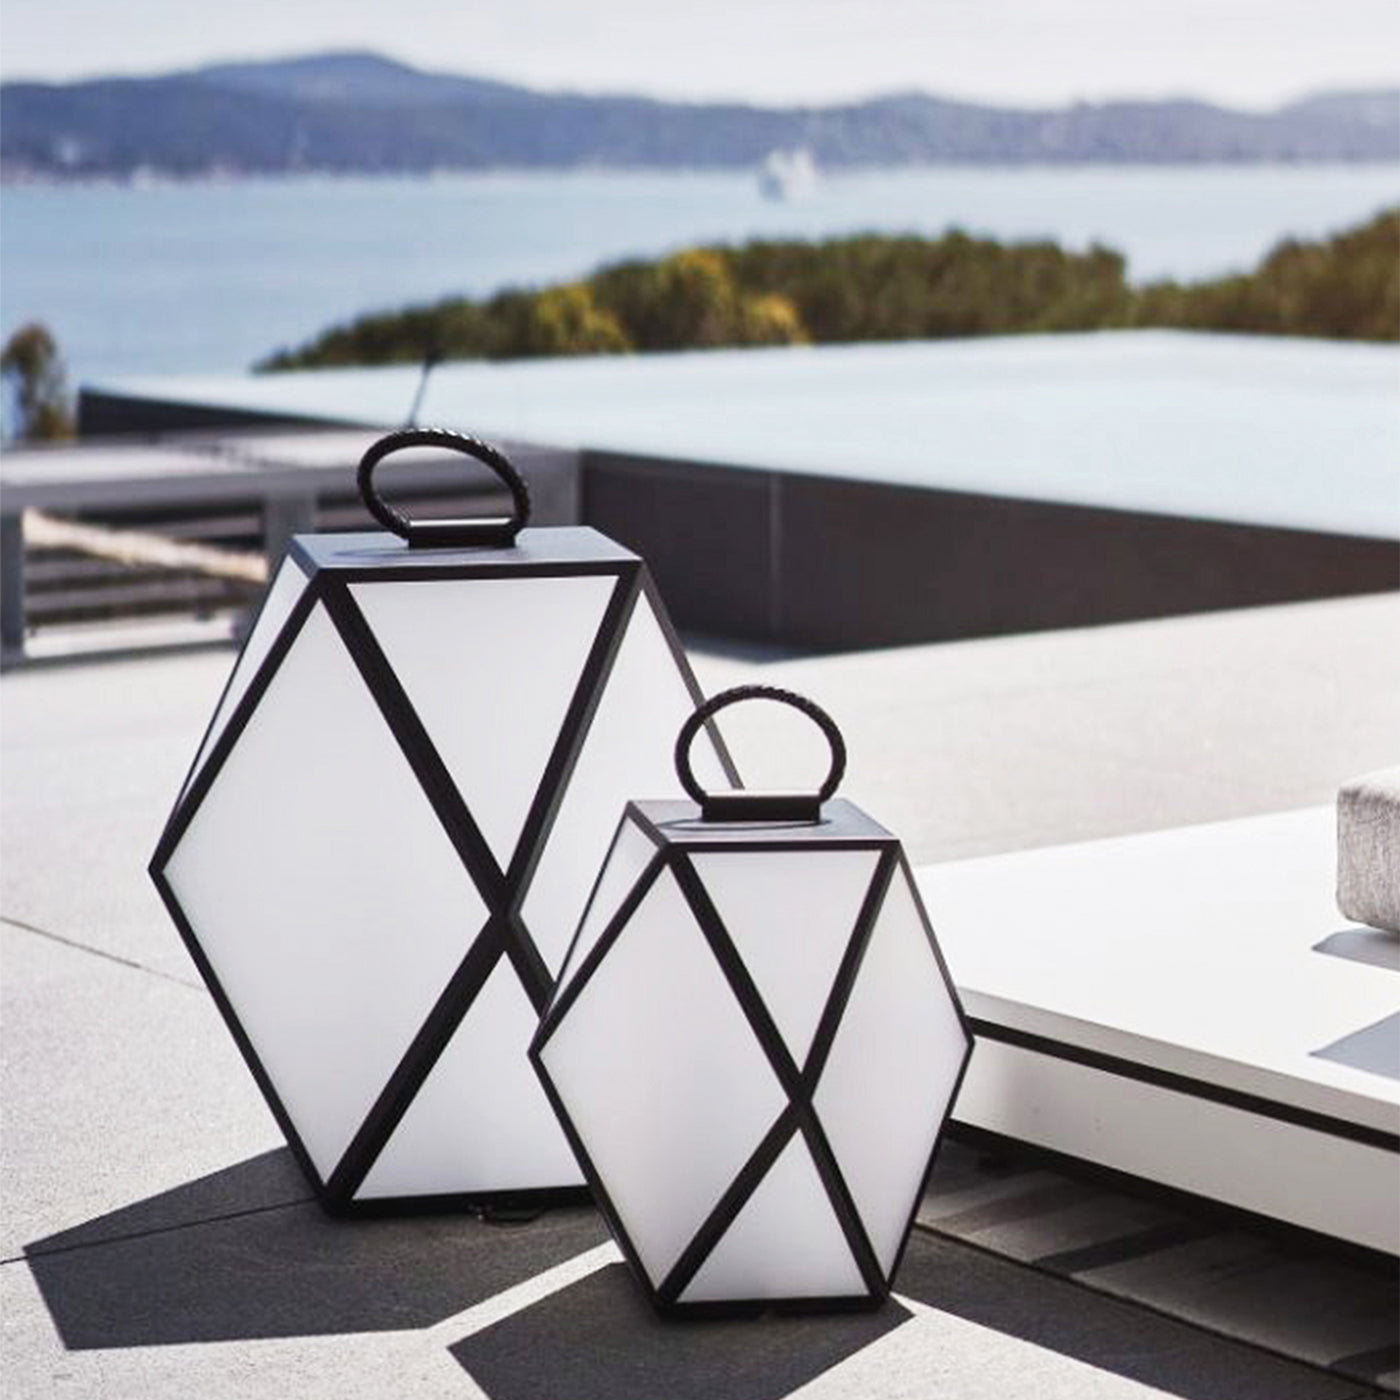 Muse Black Outdoor Table Lamp by Tristan Auer - Alternative view 1